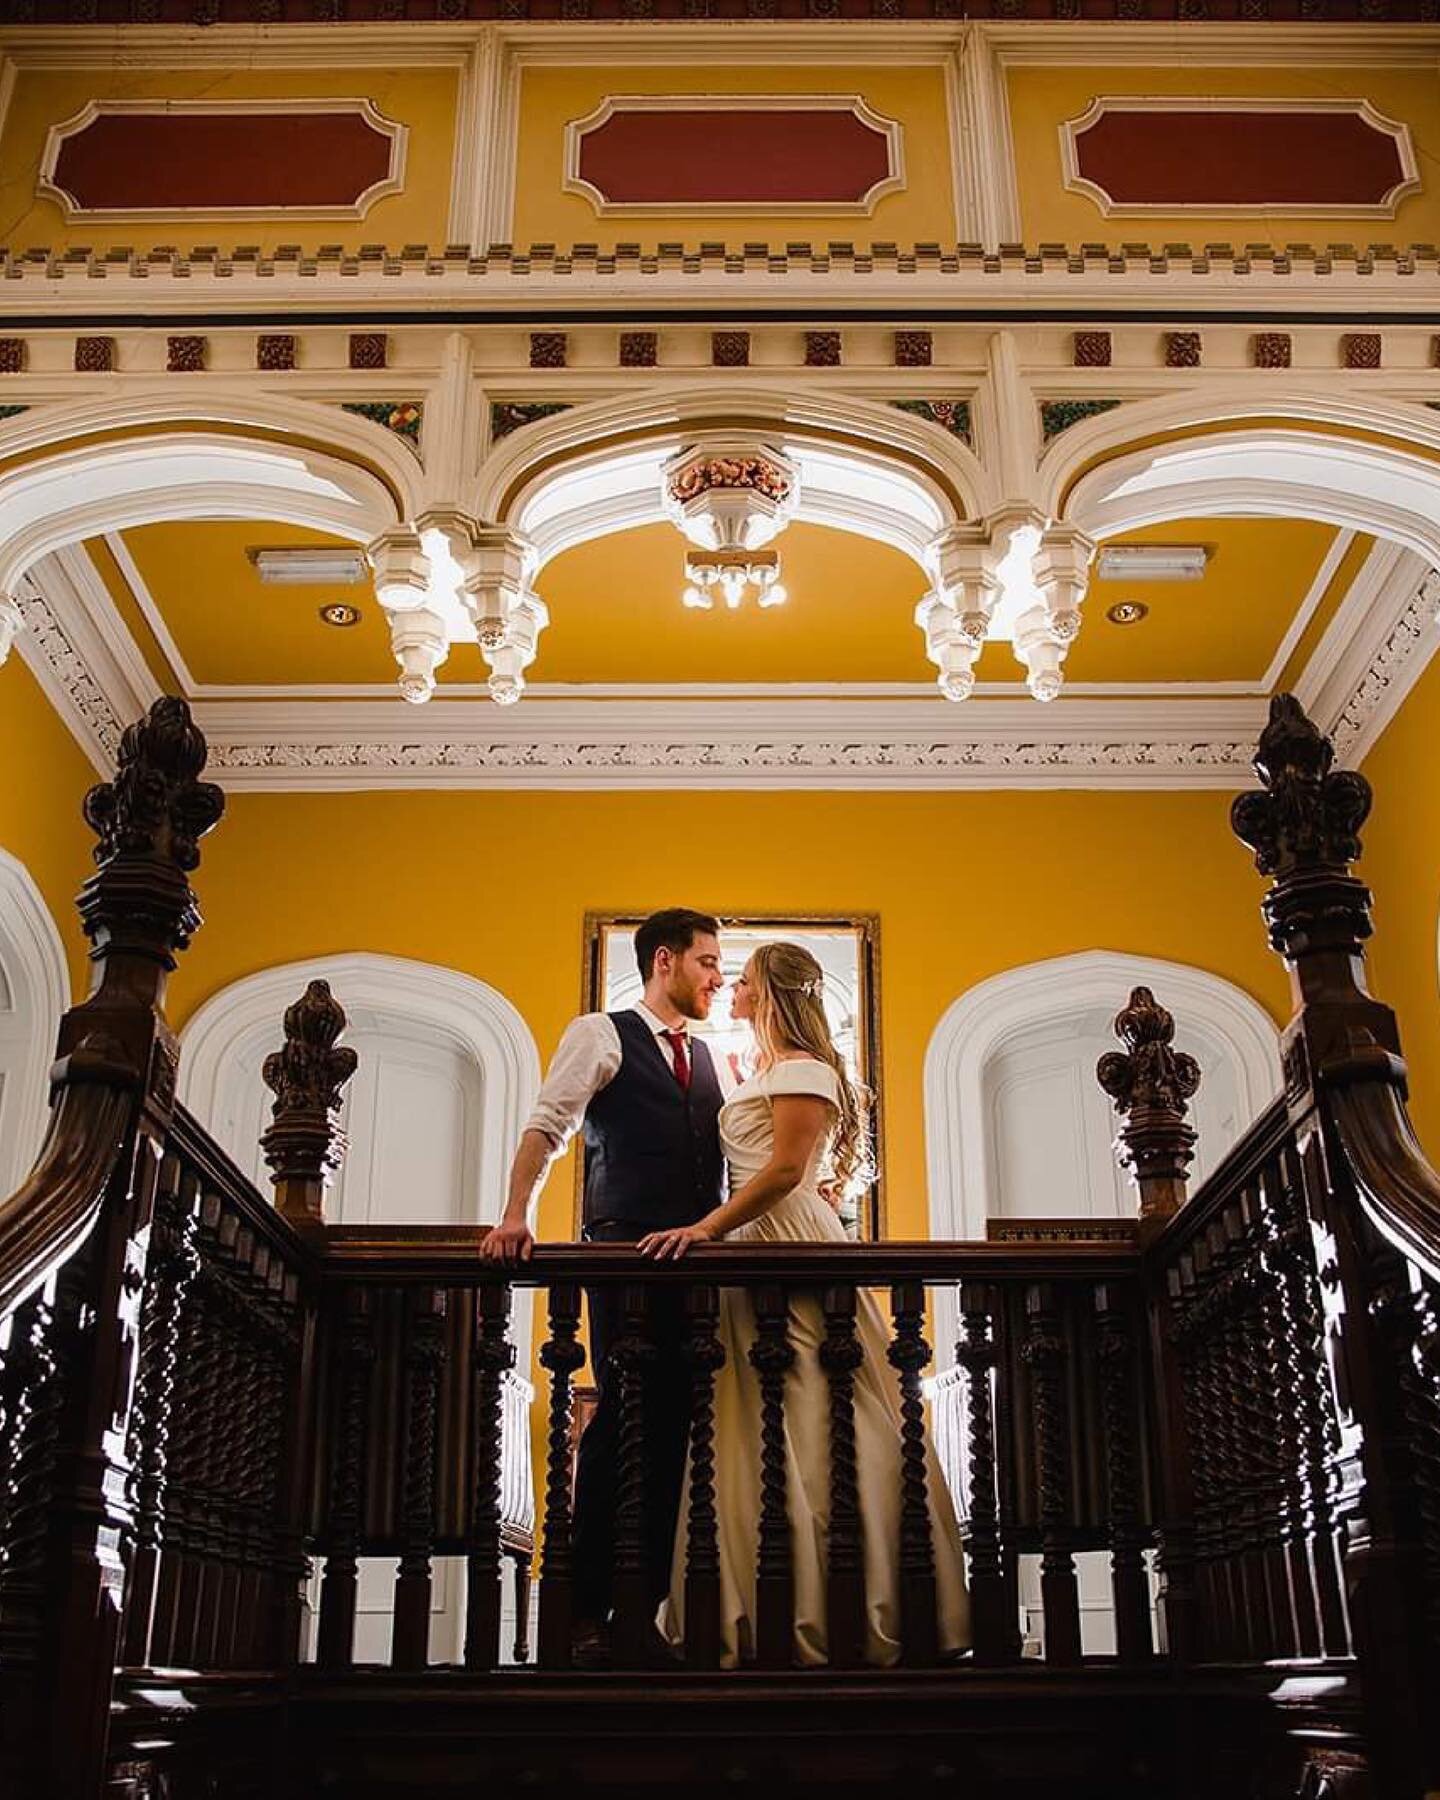 Vera and Adam at Hollin House Hotel
(on the hottest day of the year! 🥵)

Thank goodness for air conditioning! - it was a very warm day for Vera and Adam&rsquo;s wedding at Hollin House Hotel; but we survived on a gentle air flow of air conditioning 